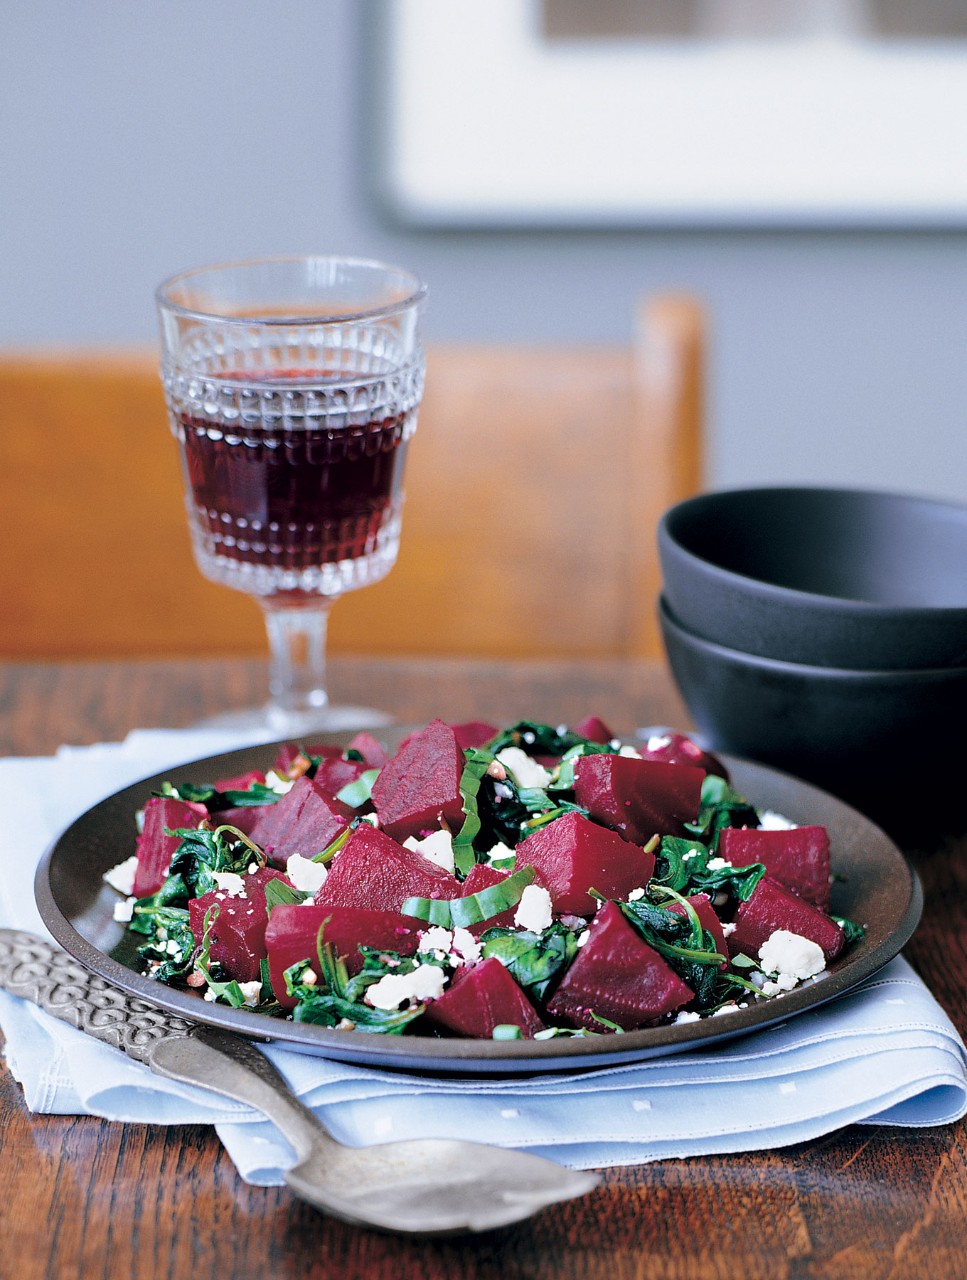 Roasted Beet, Spinach and Goat Cheese Mix